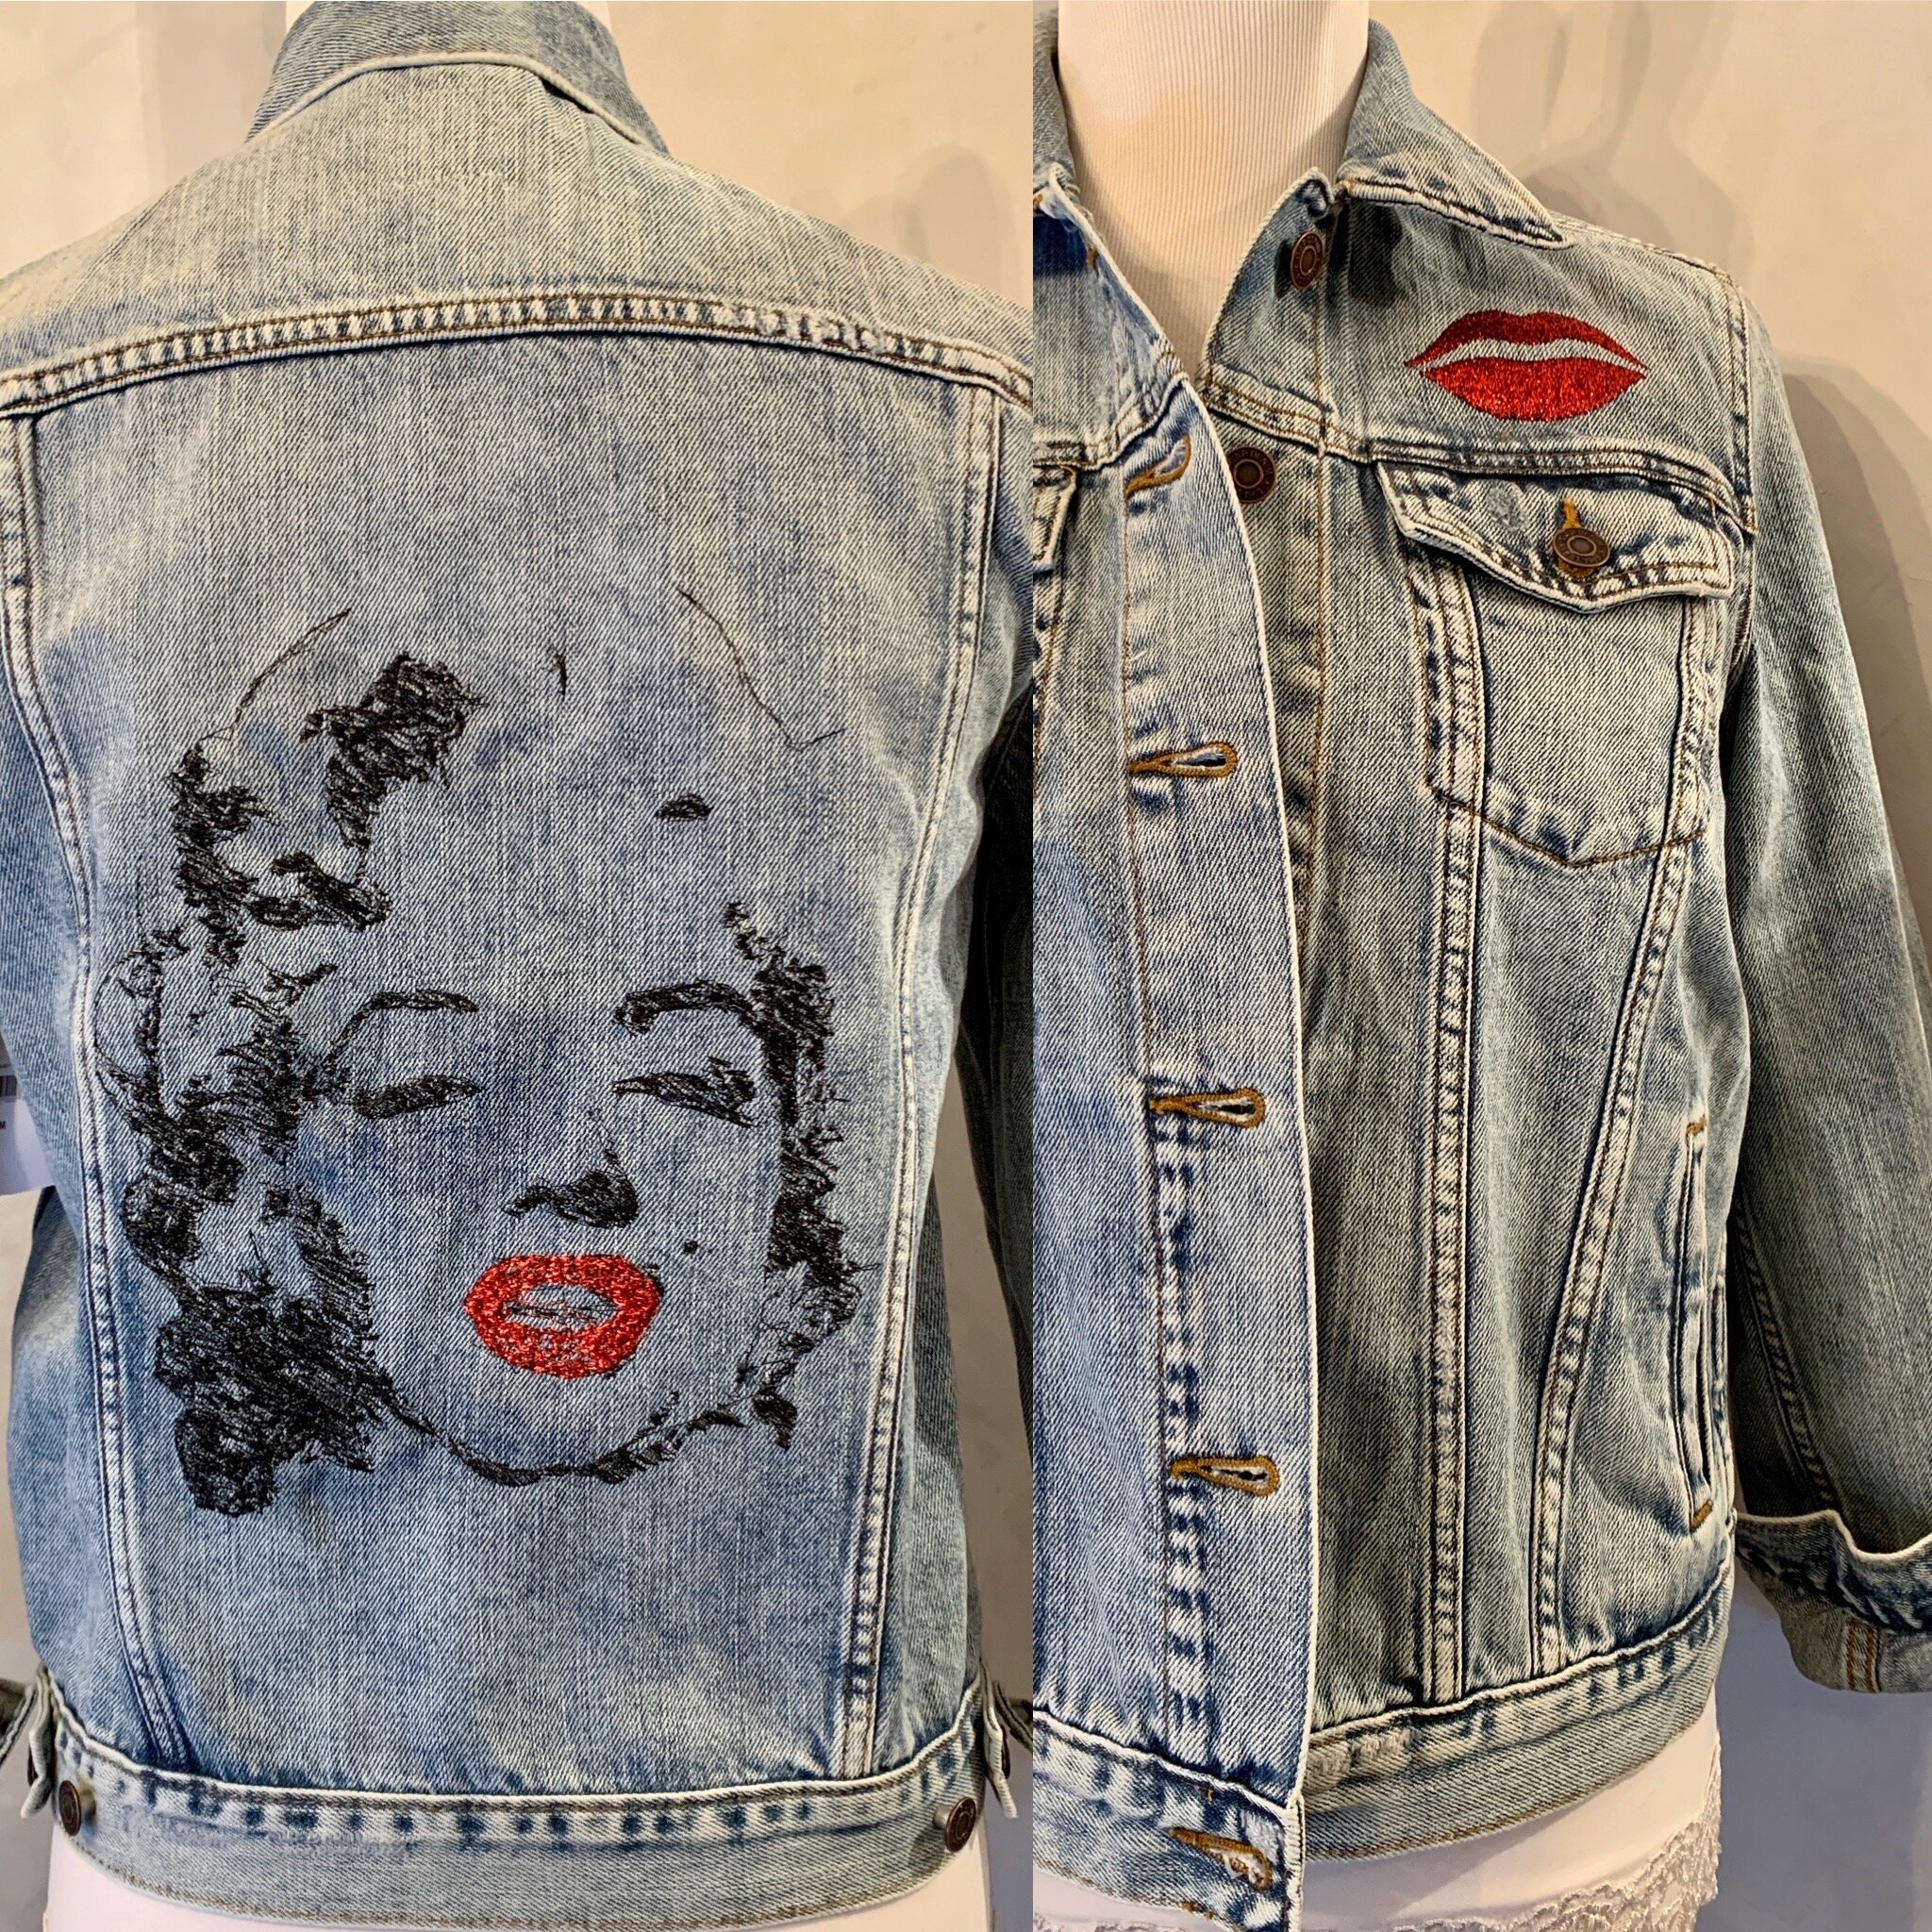 Embroidered Denim — Sew Cheeky & The Hanky Shoppe